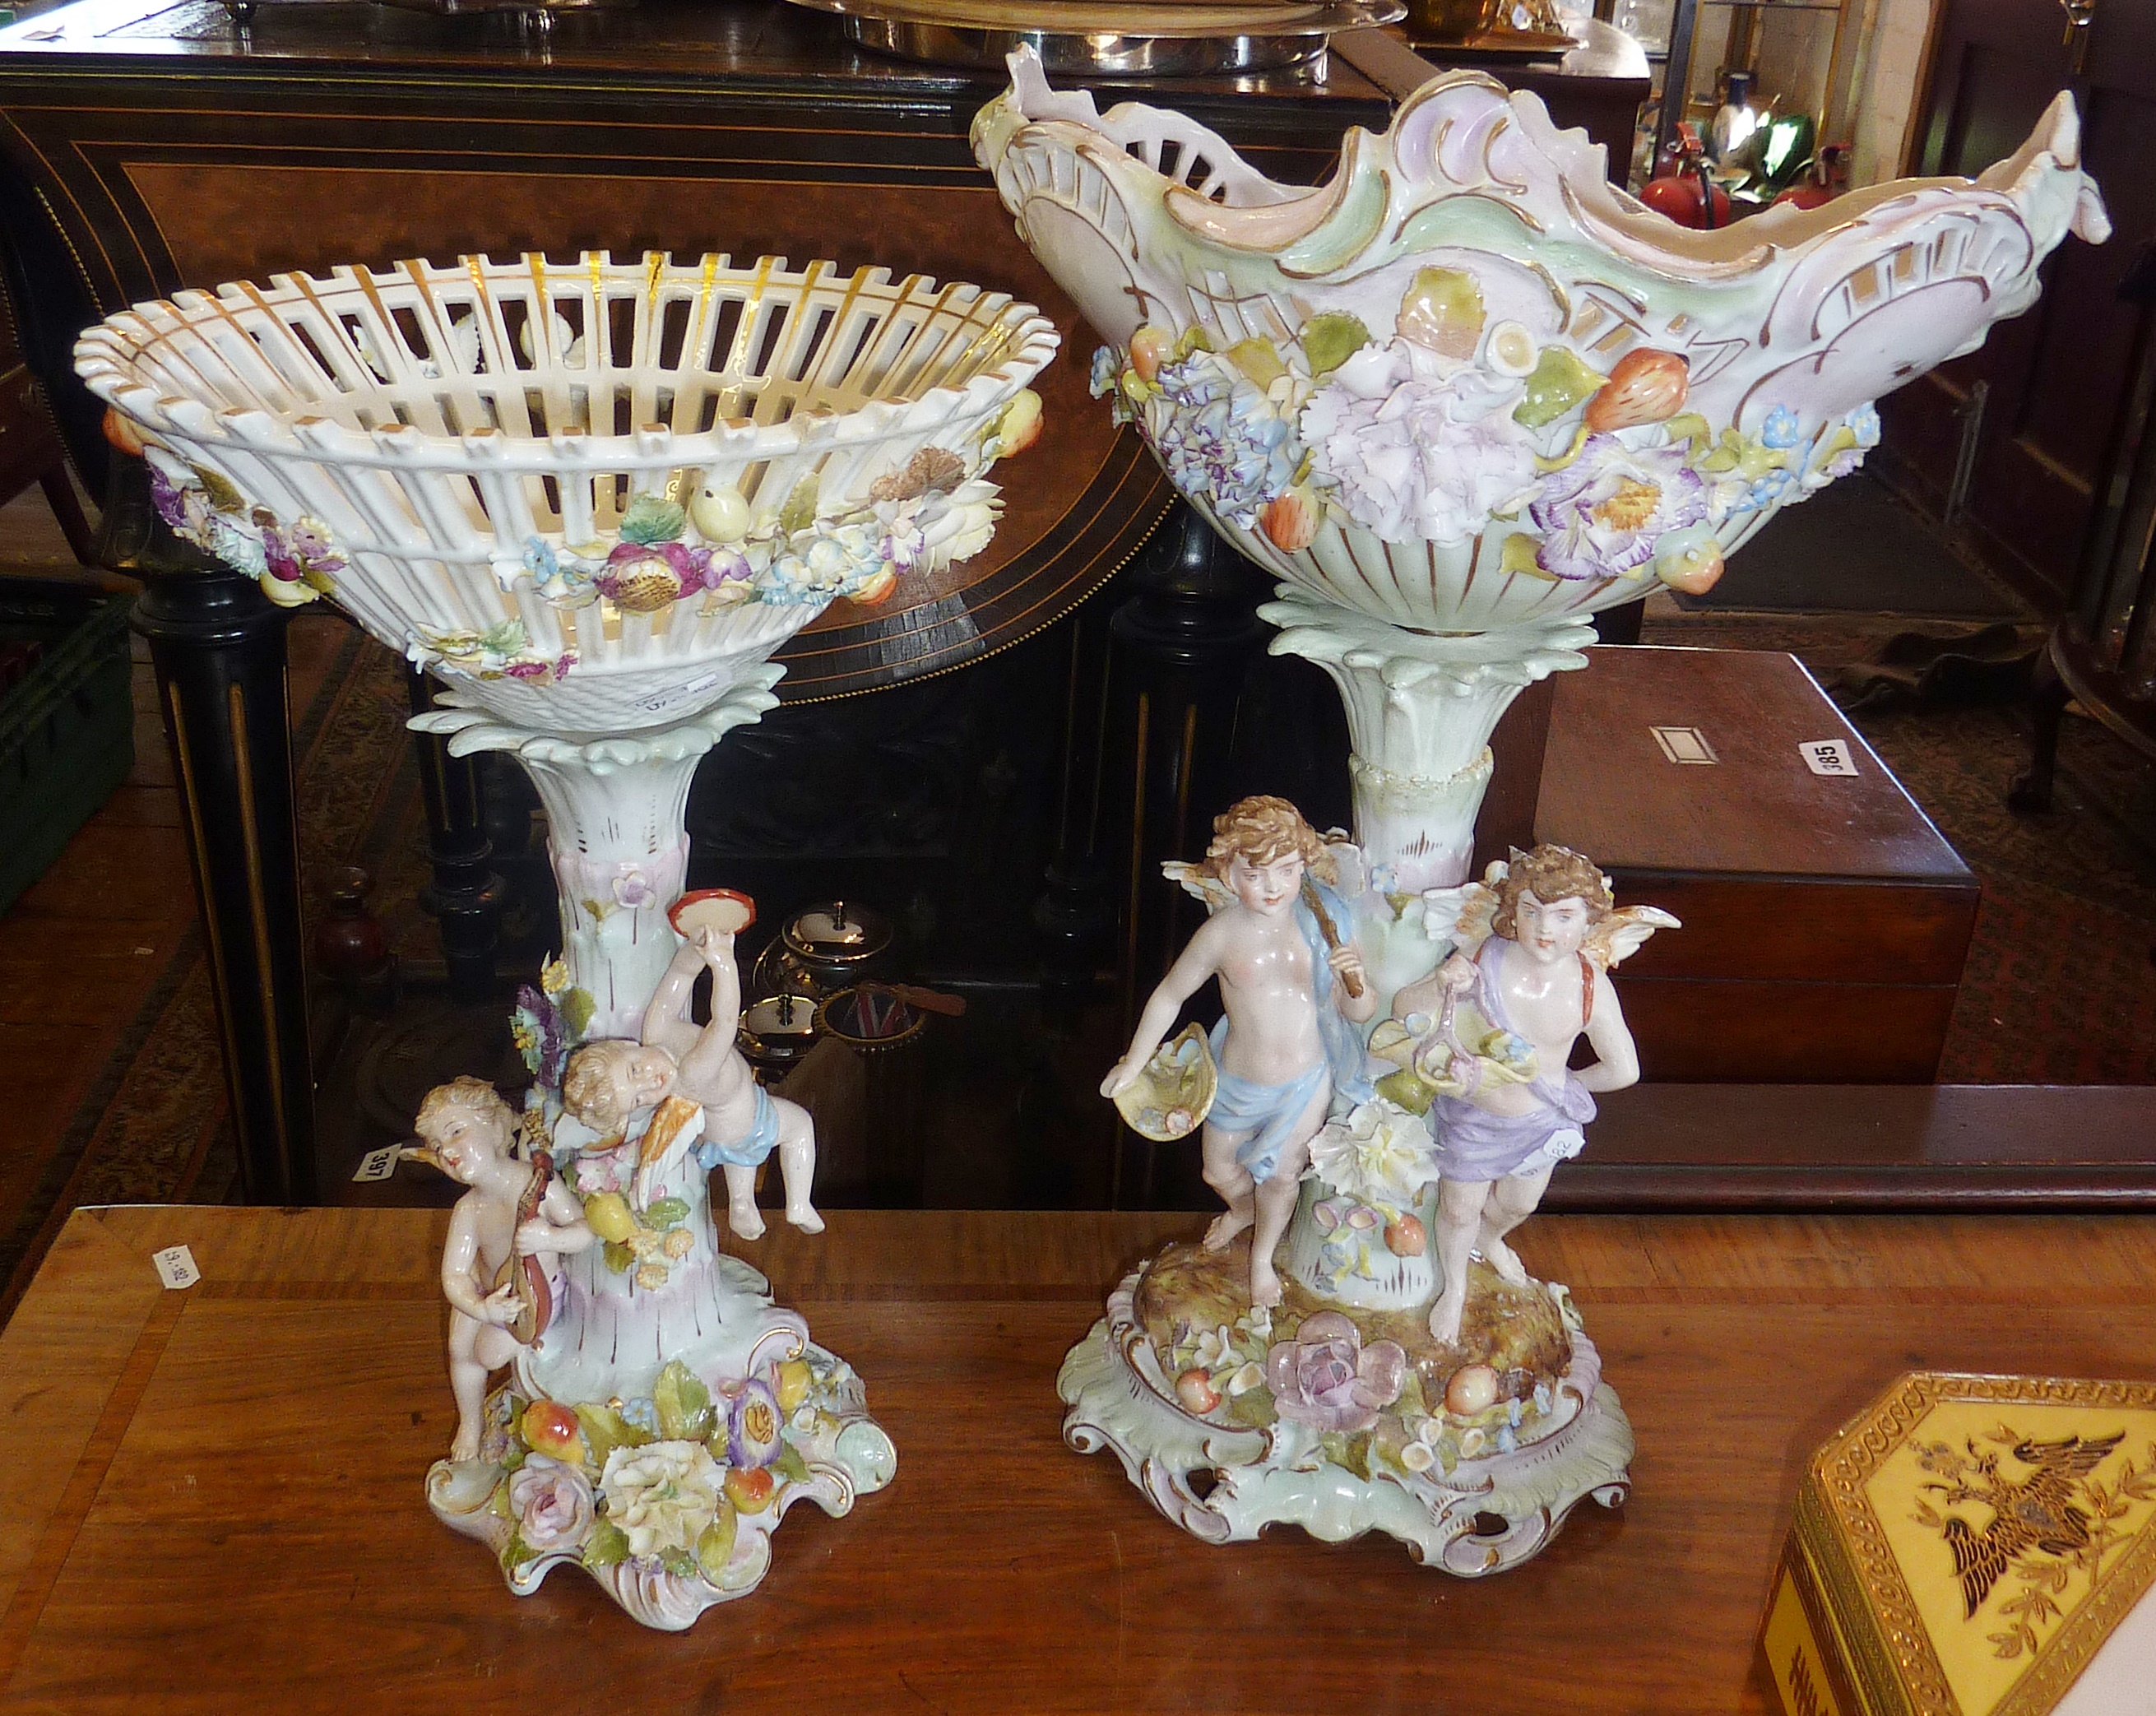 Austrian or German porcelain figural centrepieces, decorated with cherubs and flowers (both - Image 2 of 3